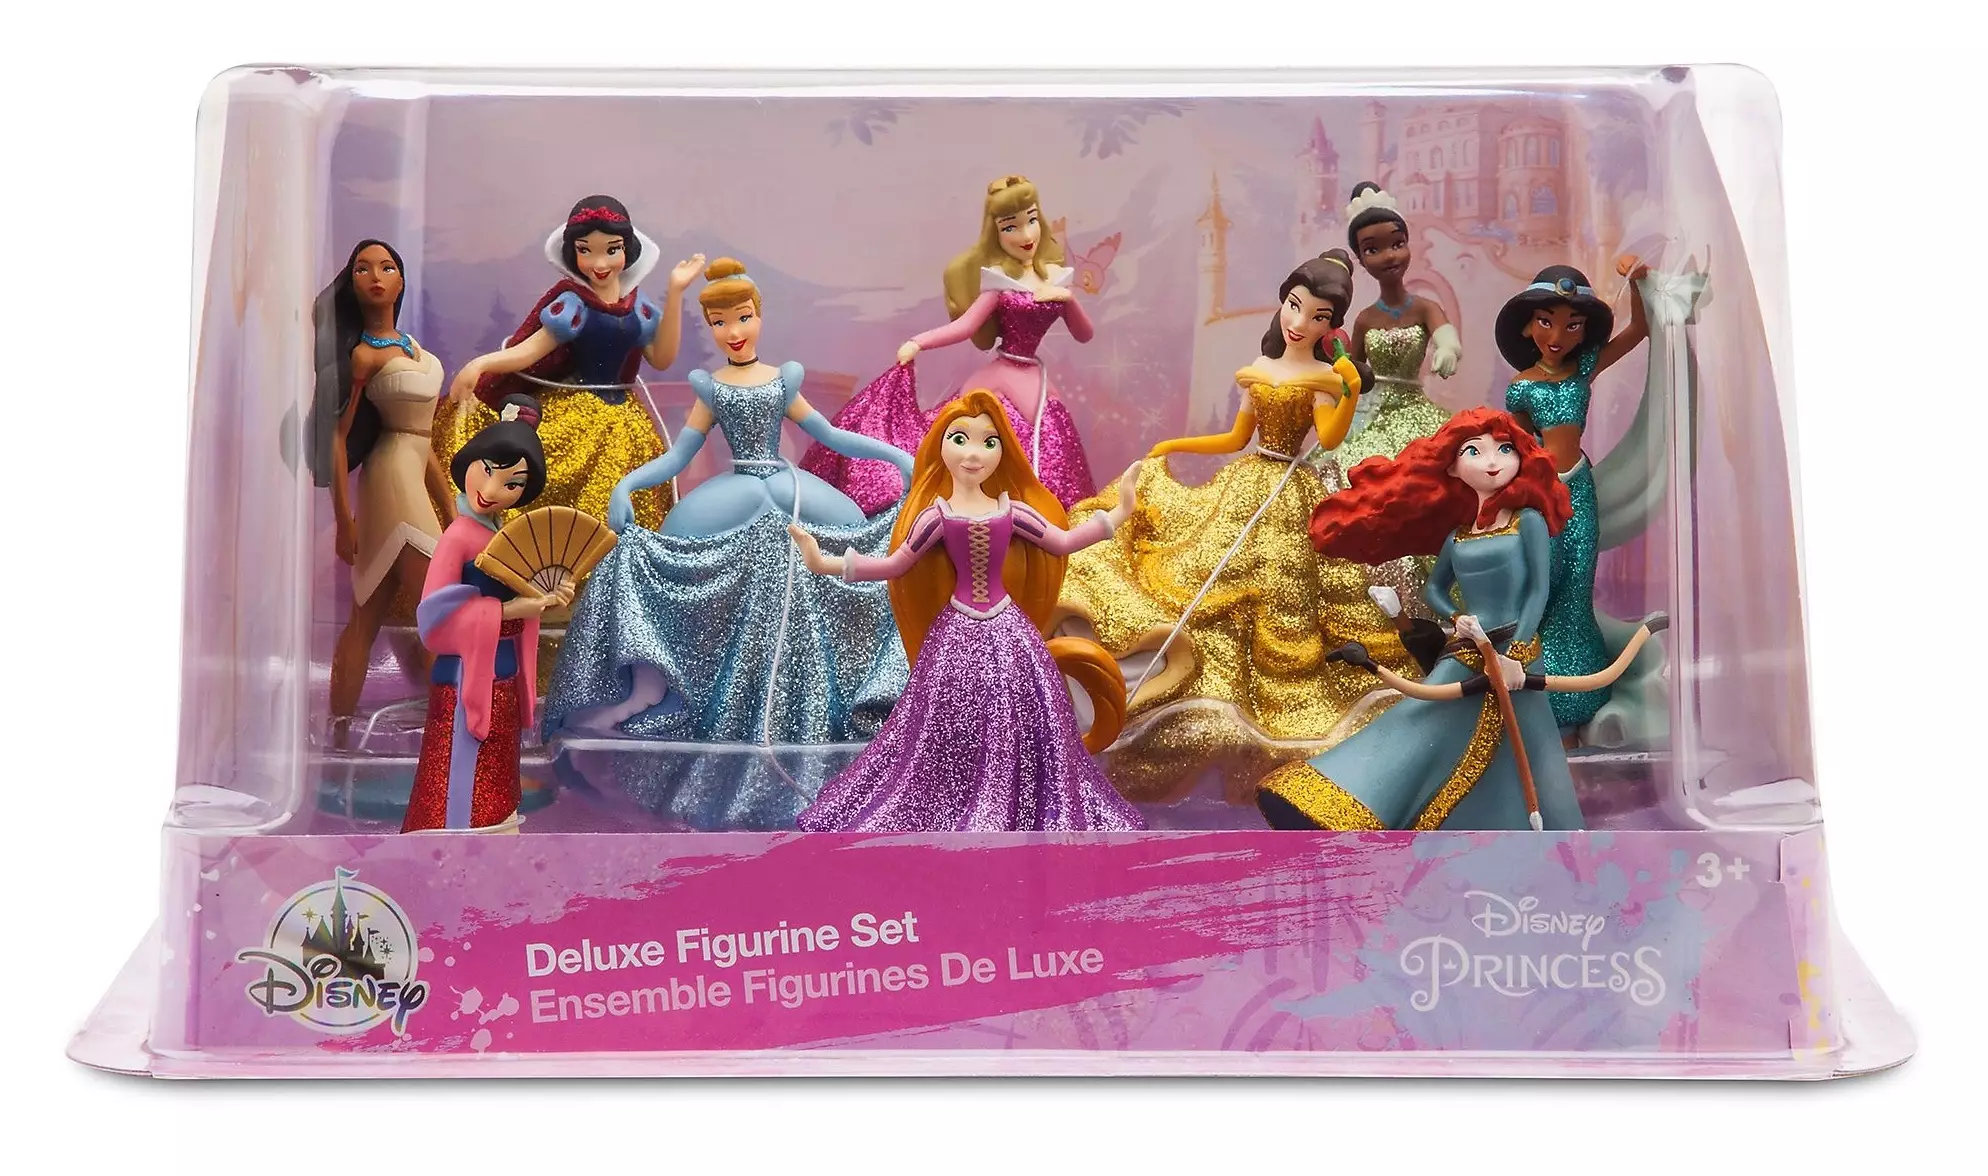 These glittery princess figurines will no doubt keep kids amused for hours. (